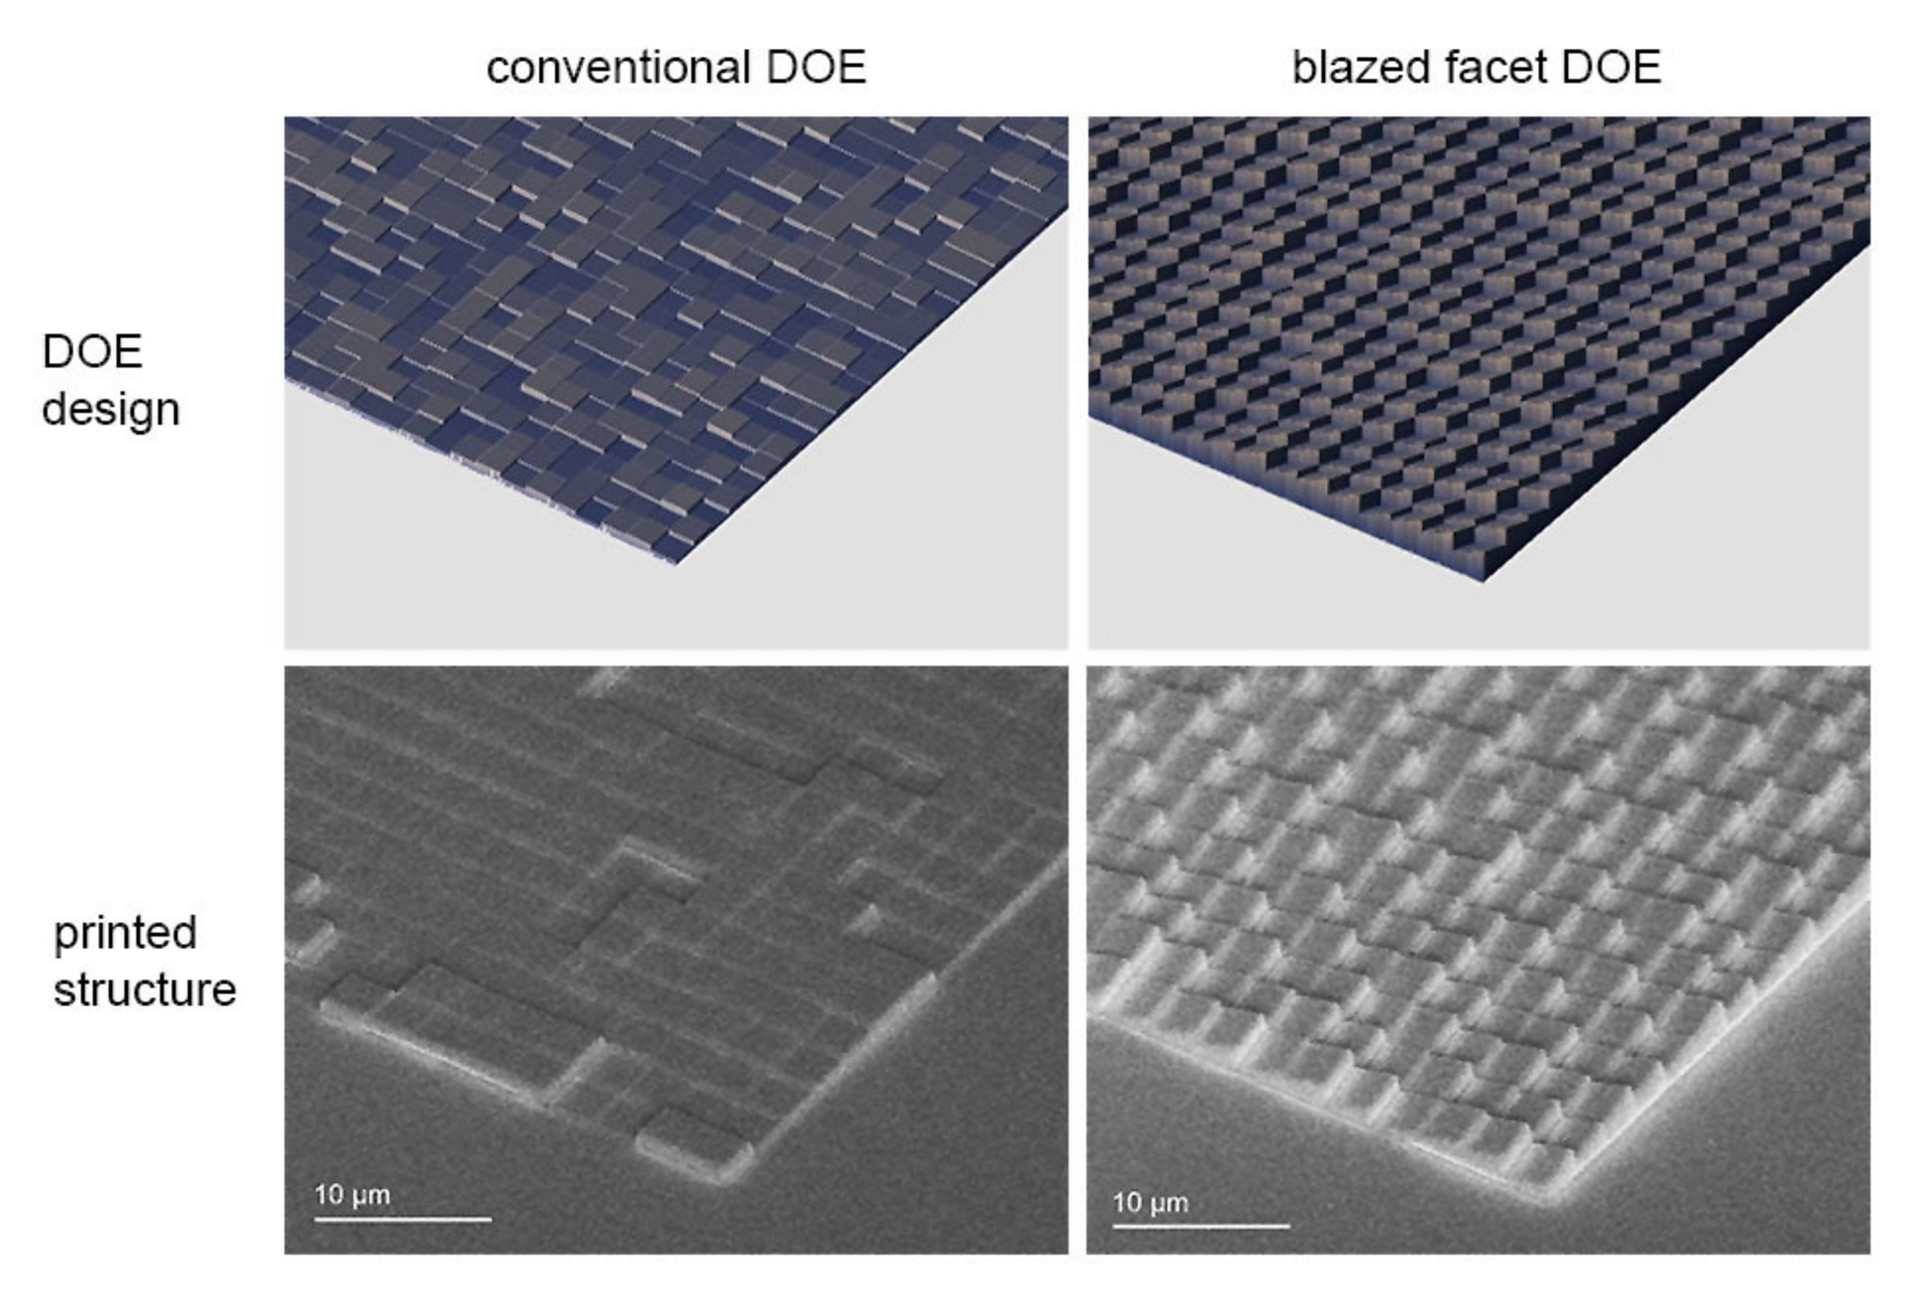 Conventional flat and blazed facet DOE structures